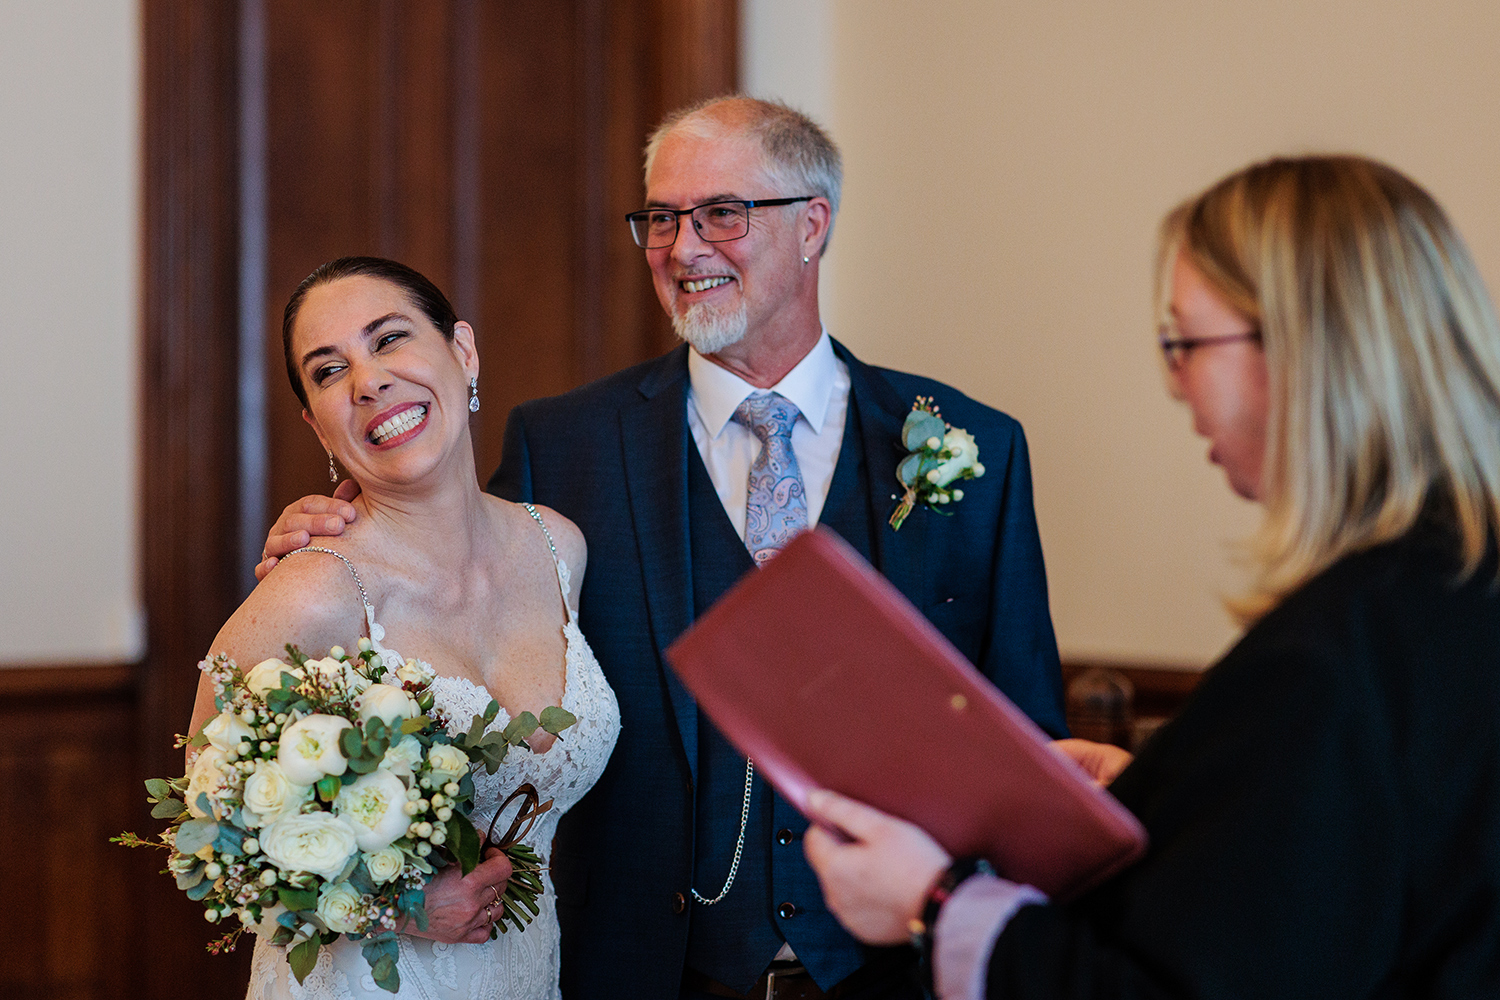 Steve and Berenice look so happy during their wedding ceremony at The Old Magistrates Court, Jersey CI